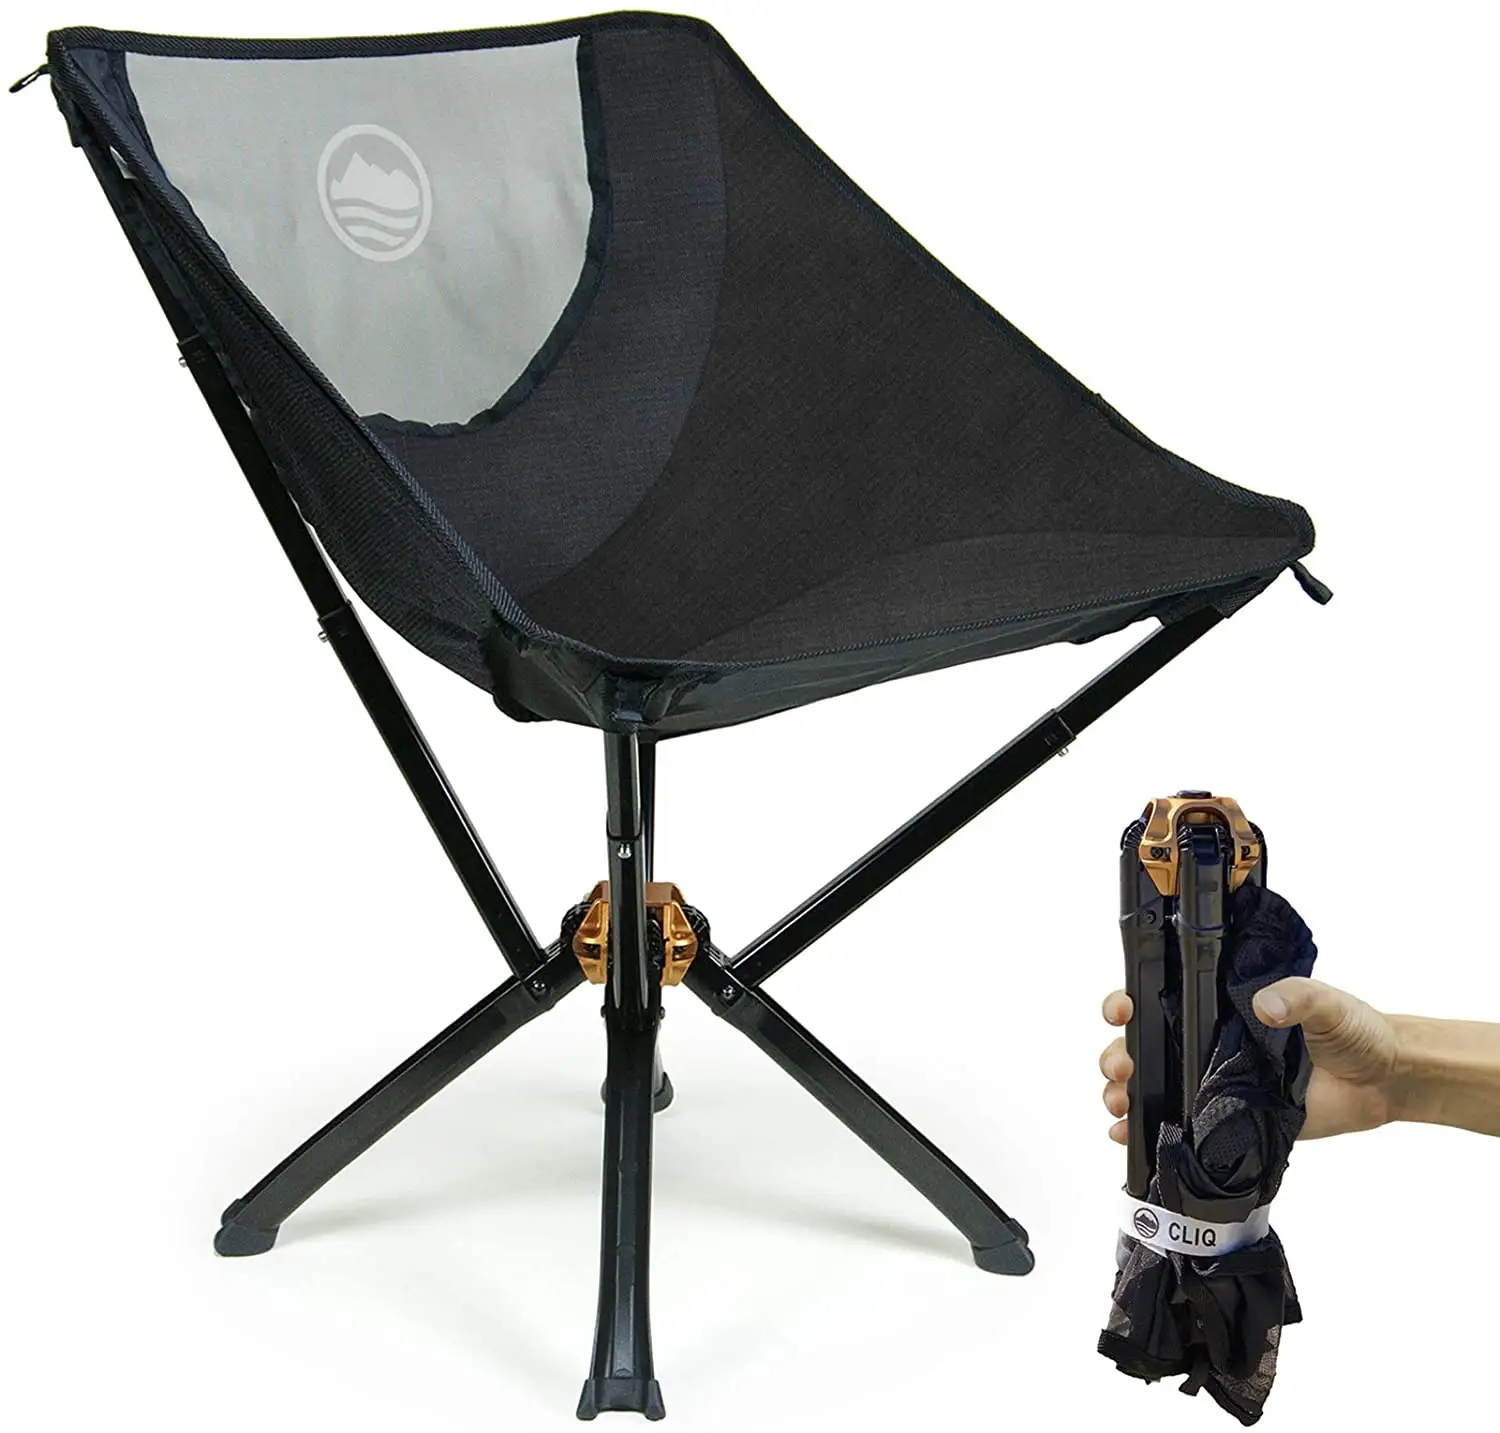 Portable Most Funded Chair in Crowdfunding History Bottle Sized Compact Outdoor Camping Chair